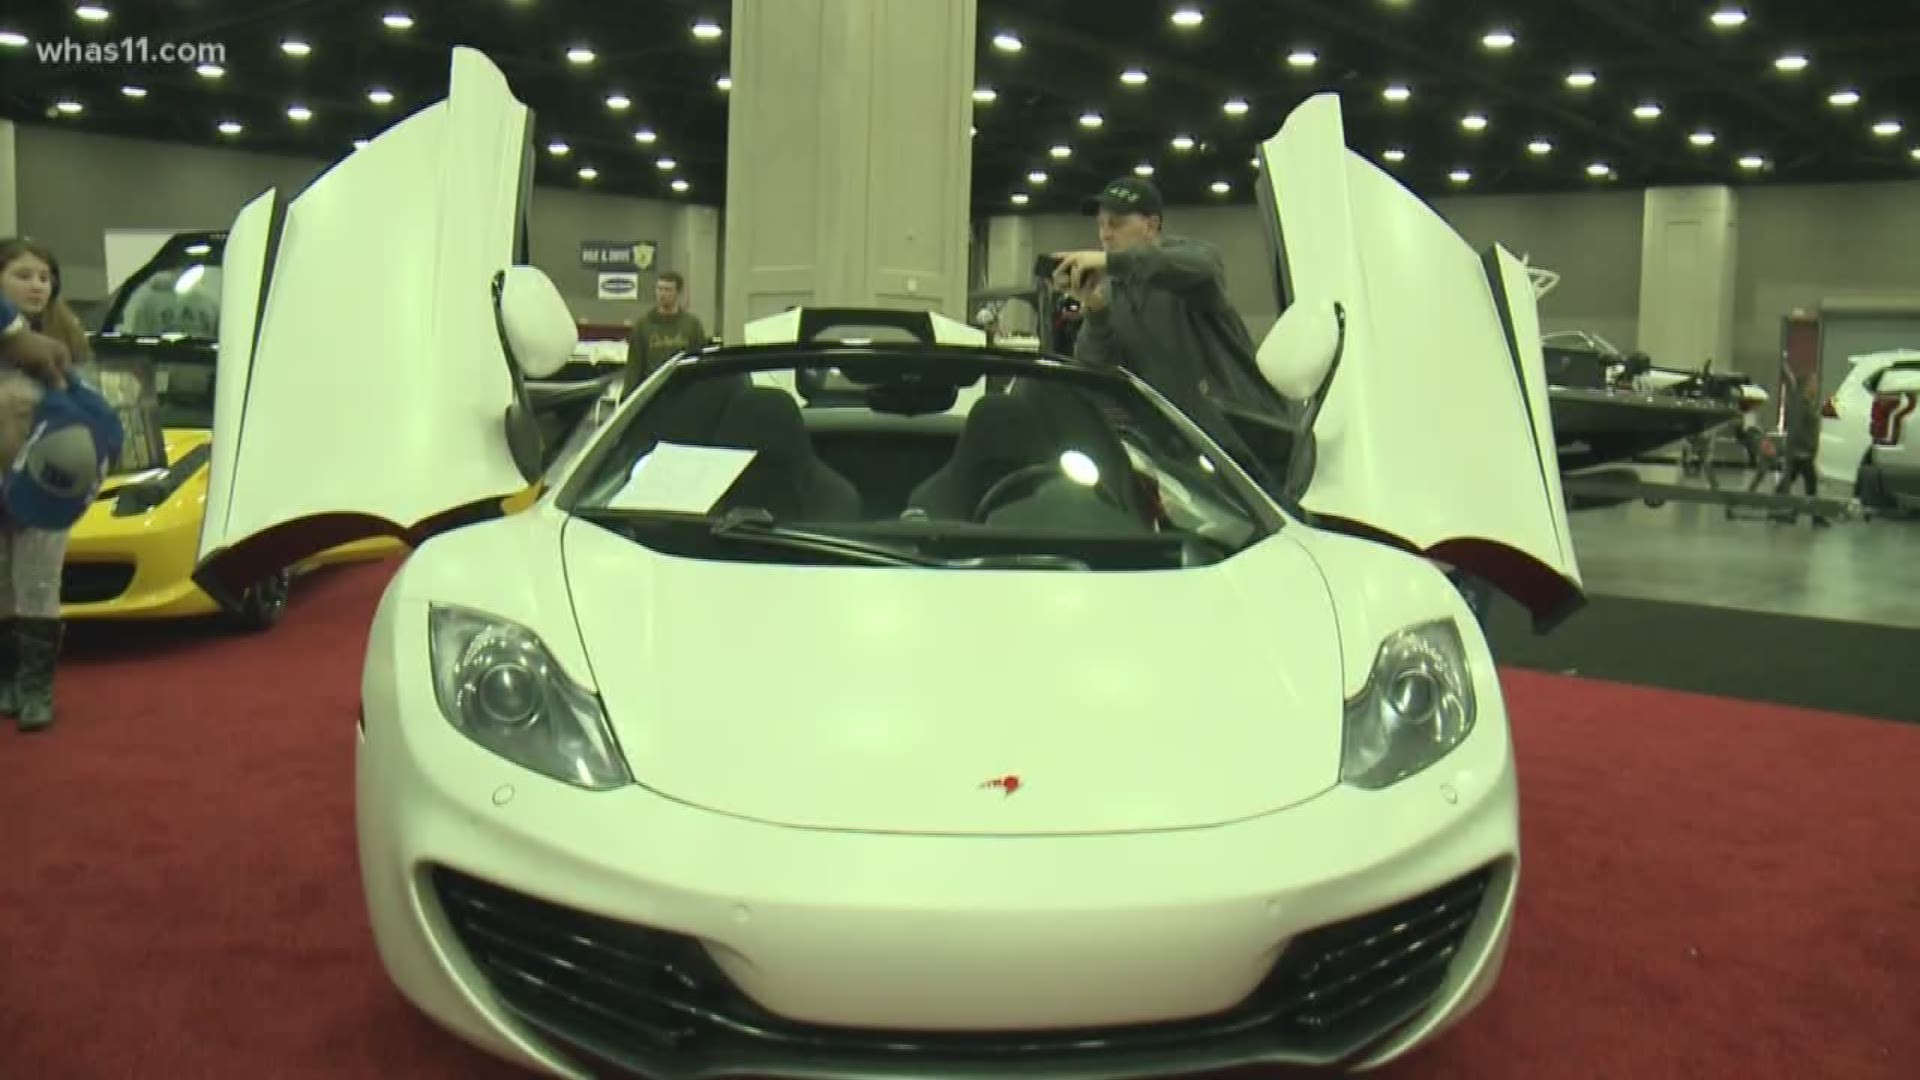 Louisville Auto Show wows visitors